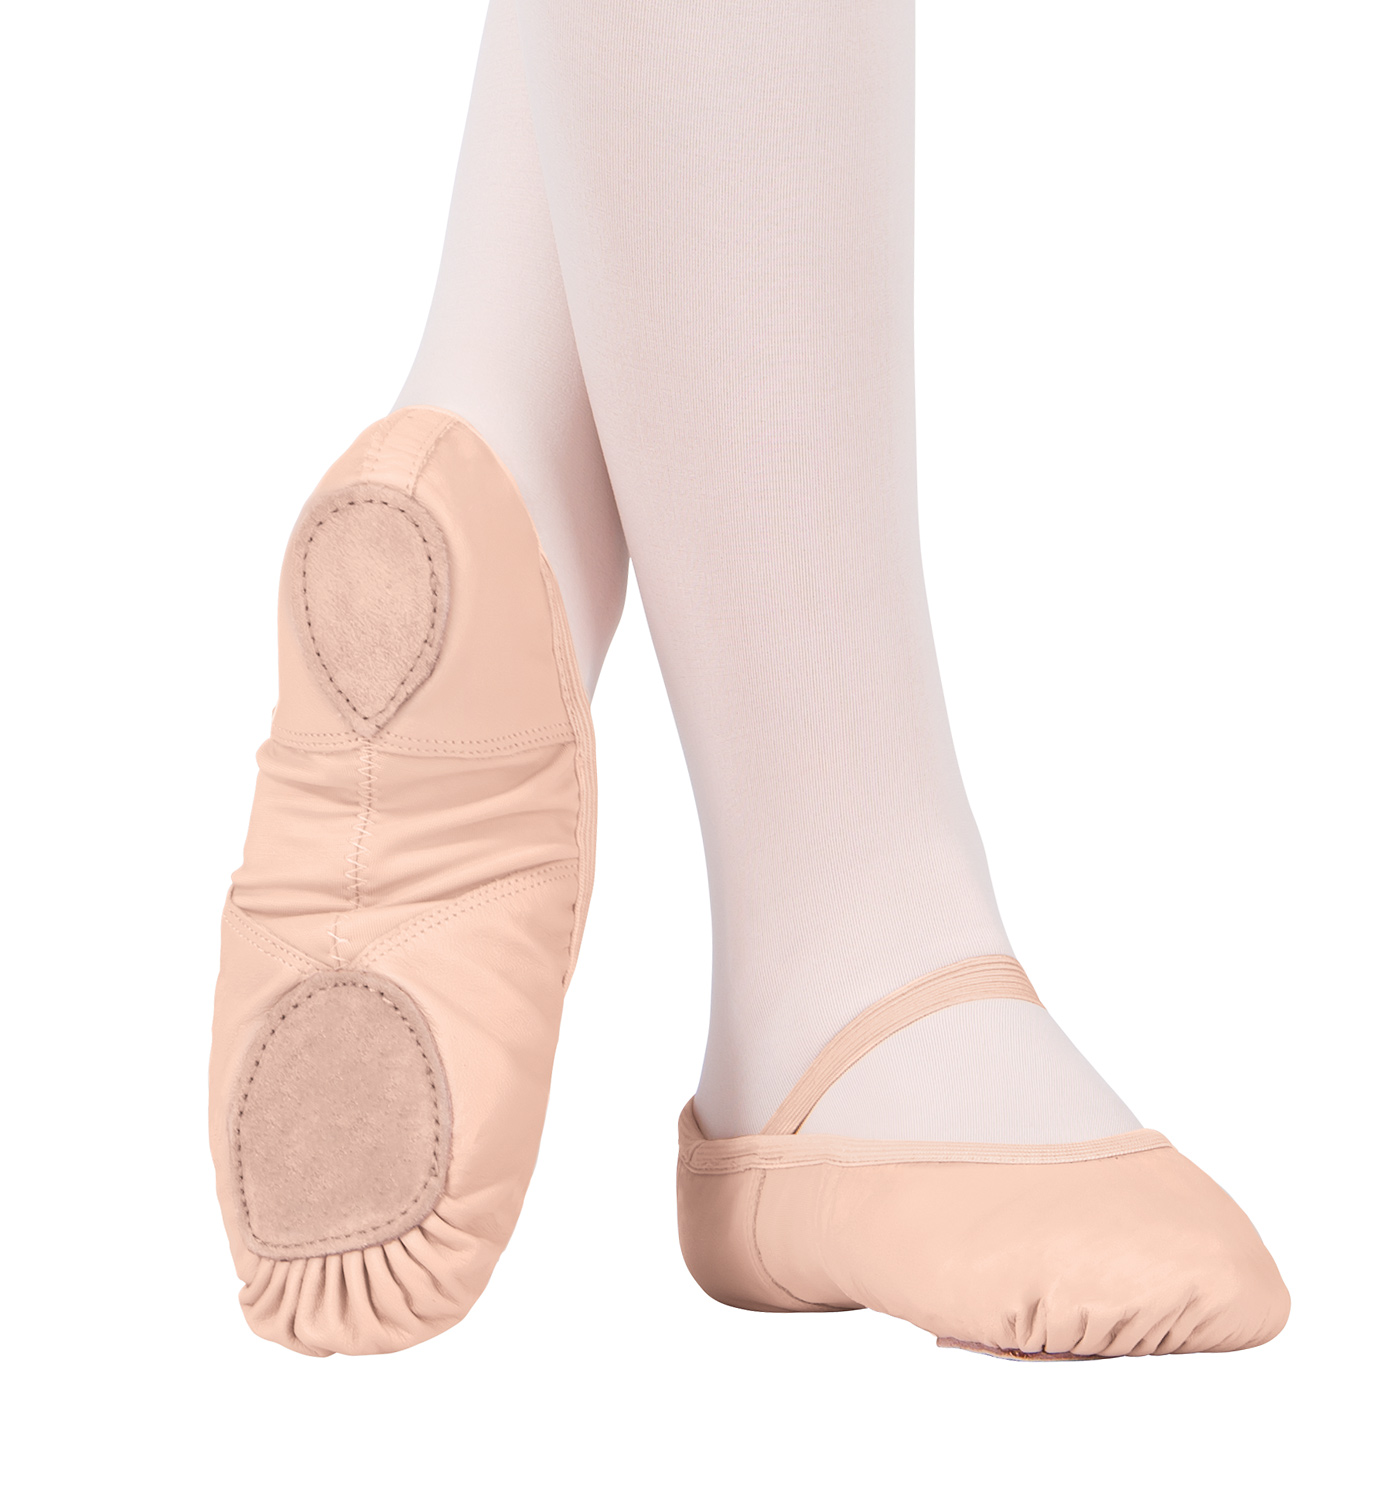 adult neoprene arch leather split-sole ballet shoes - style no t2800 HSLENNX